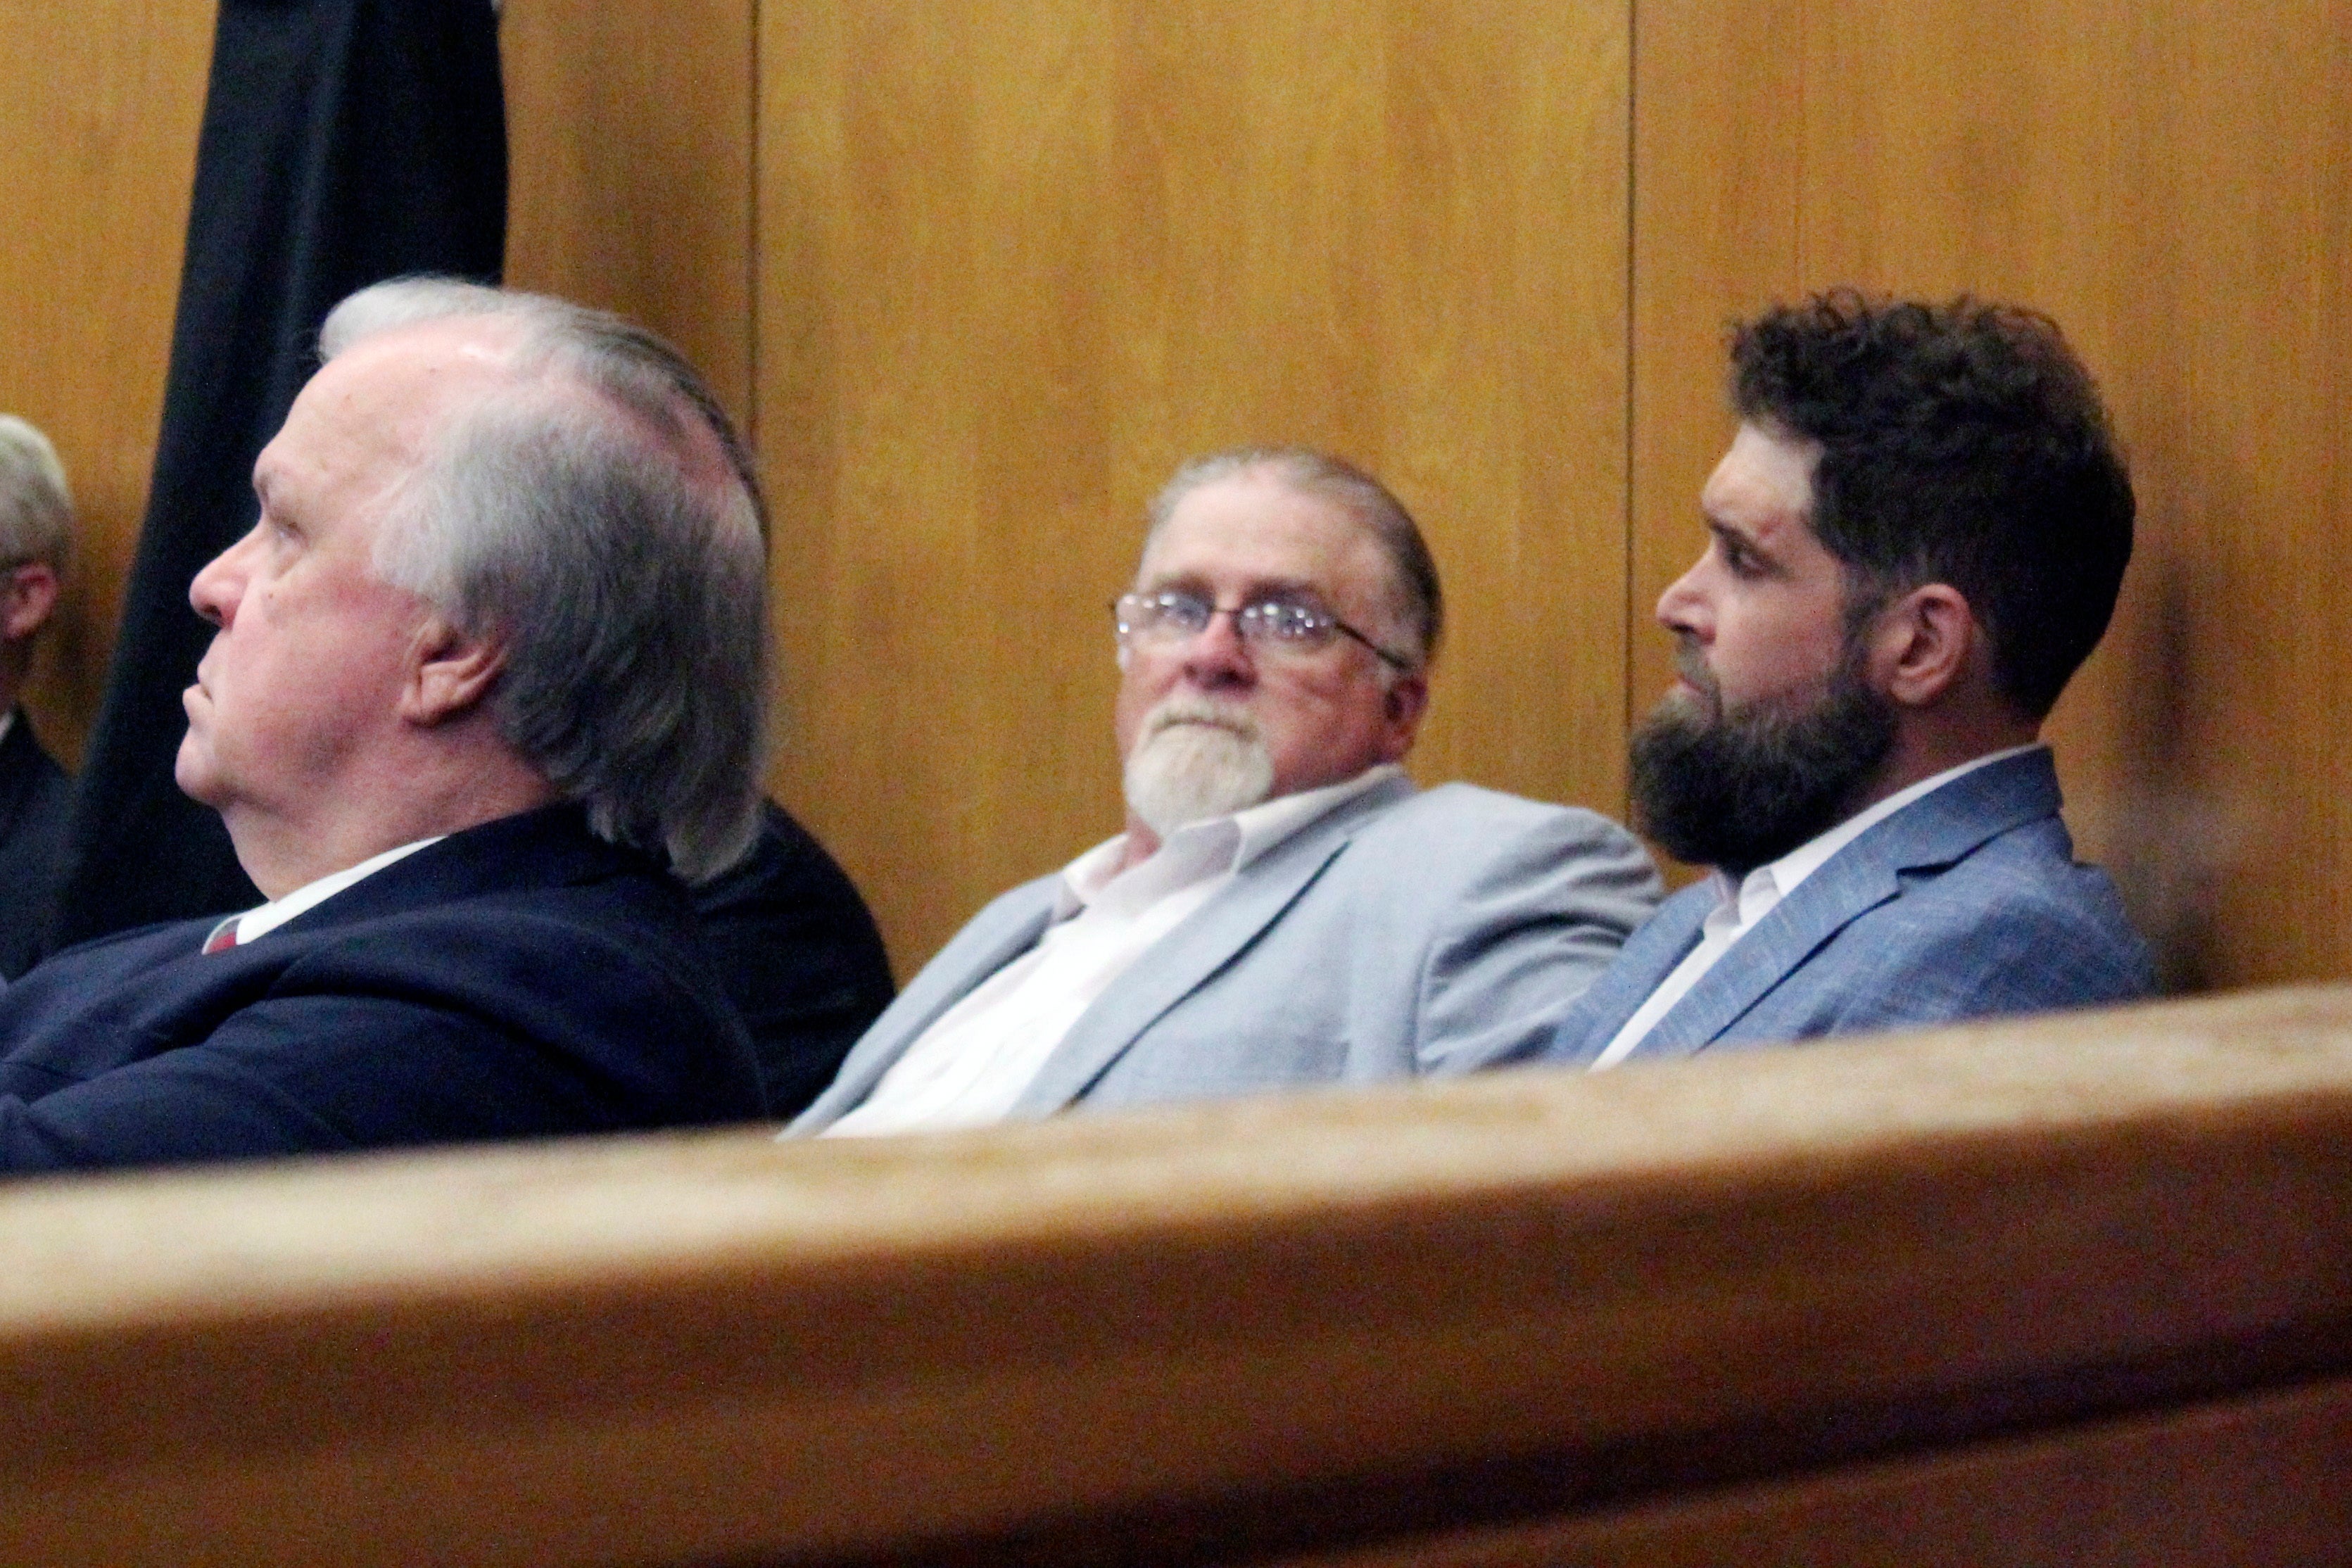 Gregory Case and Brandon Case (pictured second from right and right) at their trial earlier this month